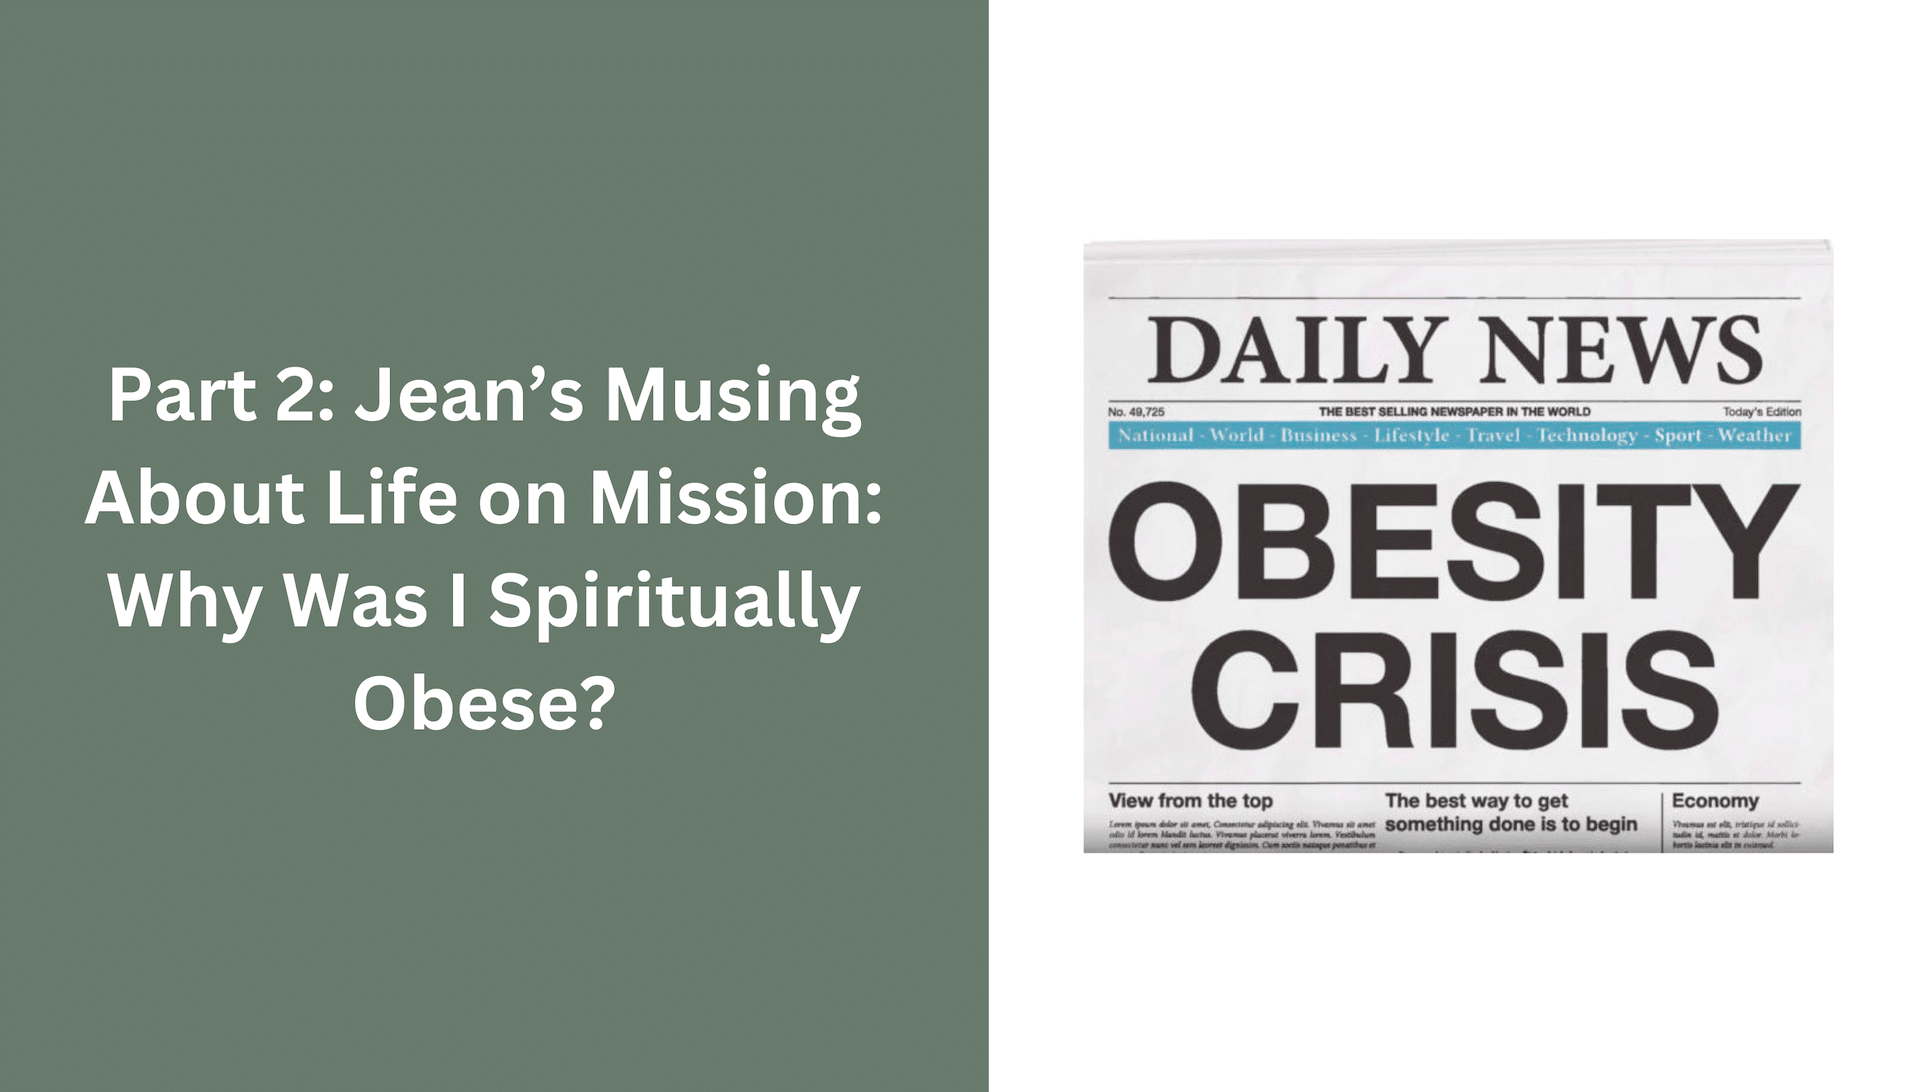 Part 2: Jean's musing about life on mission: Why was I spiritually obese?